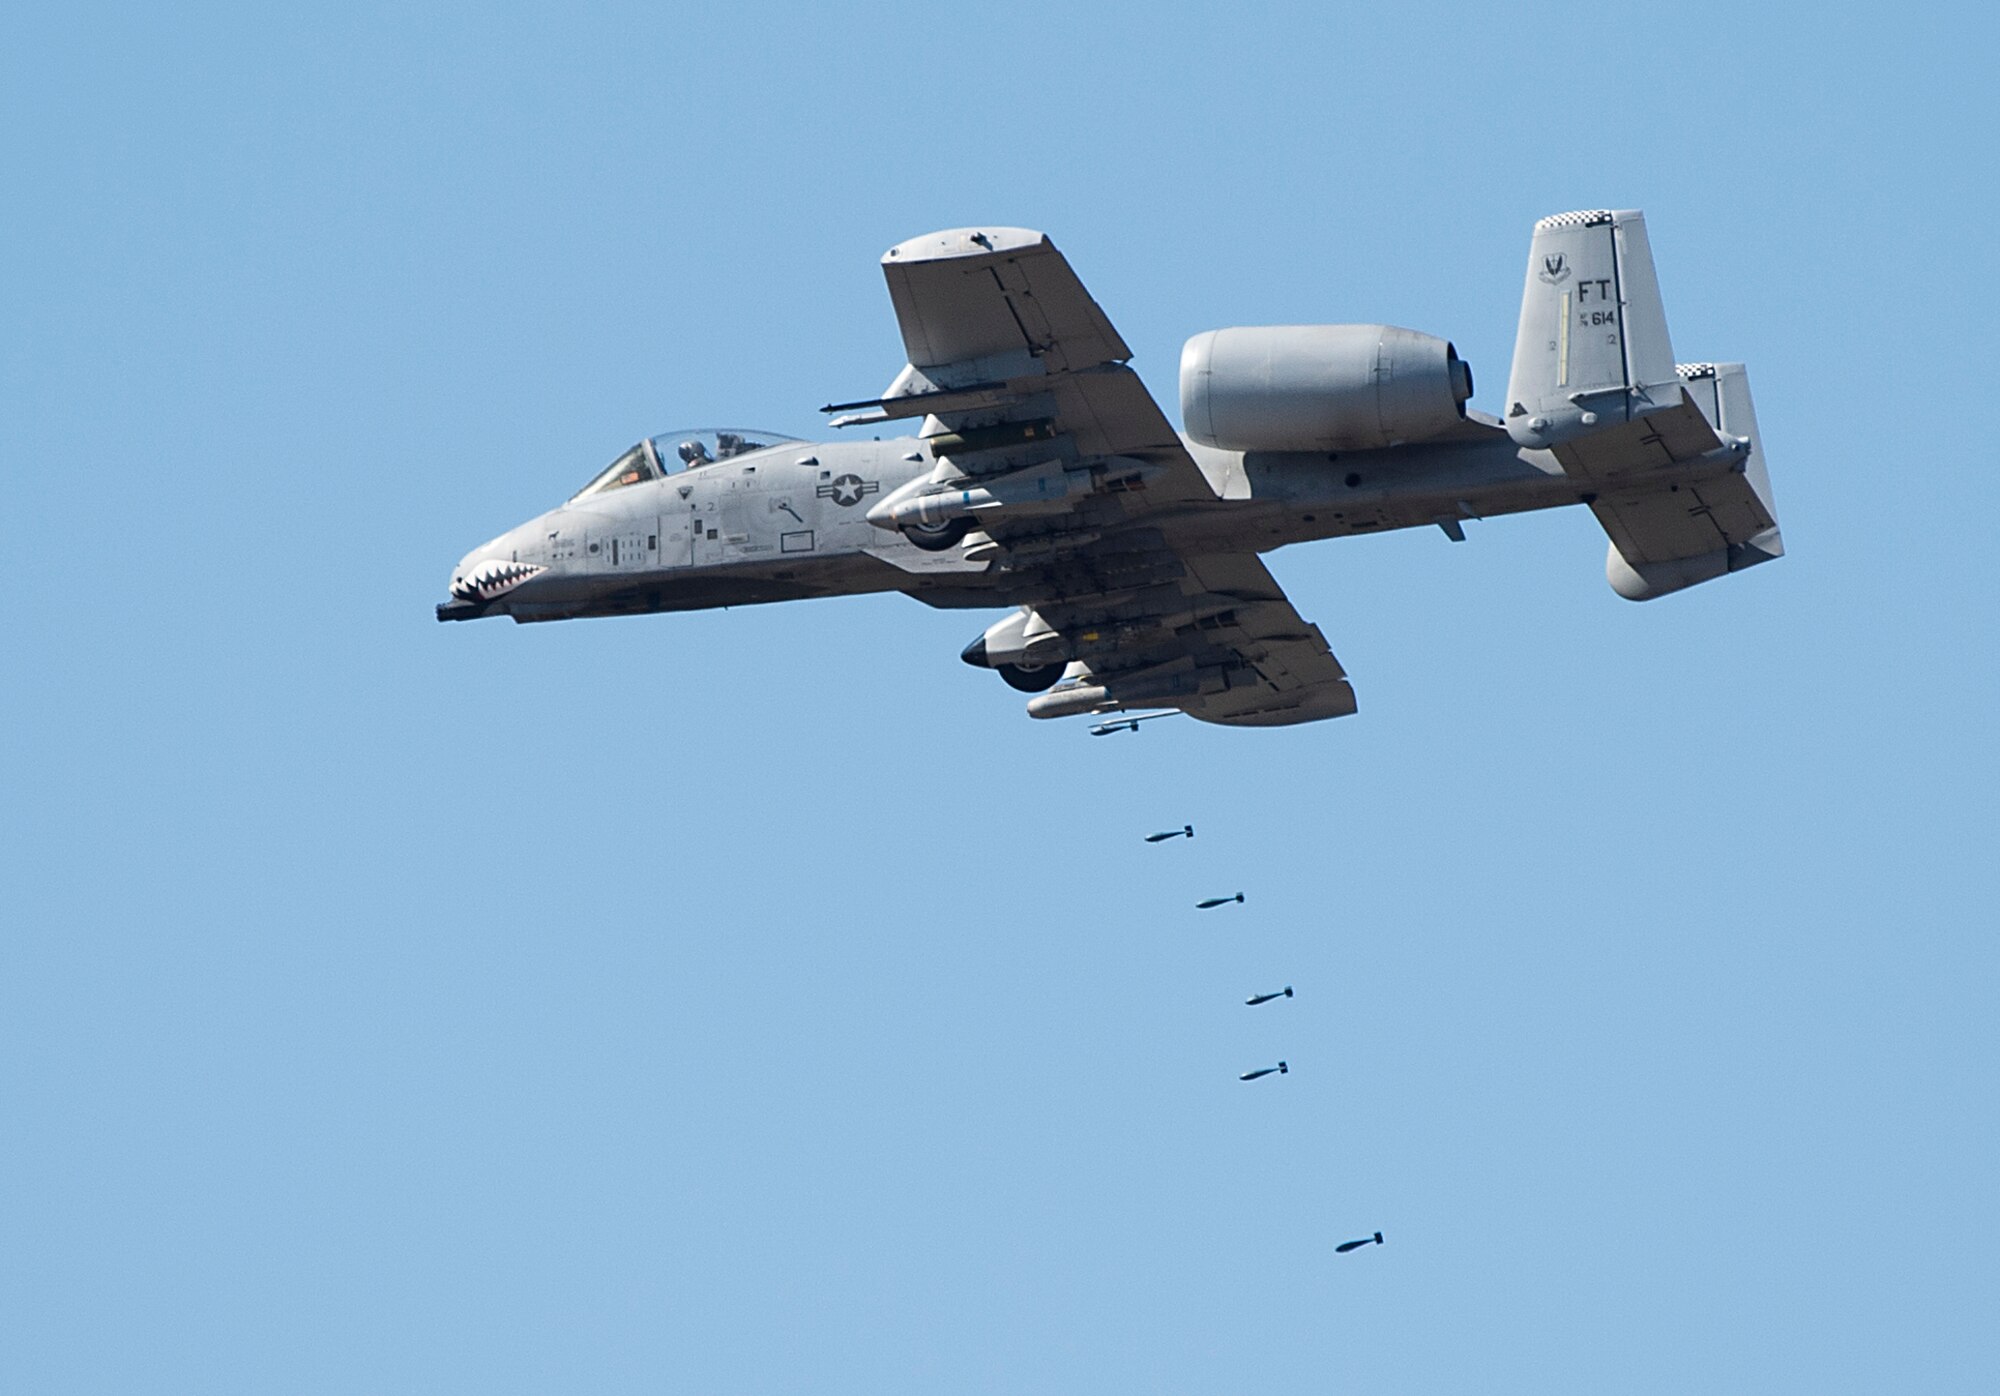 An A-10 Thunderbolt II drops practice bombs over the Grand Bay Bombing and Gunnery Range at Moody Air Force Base, Ga., Feb. 11, 2016. Multiple U.S. Air Force aircraft within Air Combat Command conducted joint aerial training that showcased the aircrafts tactical air and ground maneuvers, as well as its weapons capabilities. (U.S. Air Force photo by Staff Sgt. Brian J. Valencia/Released)